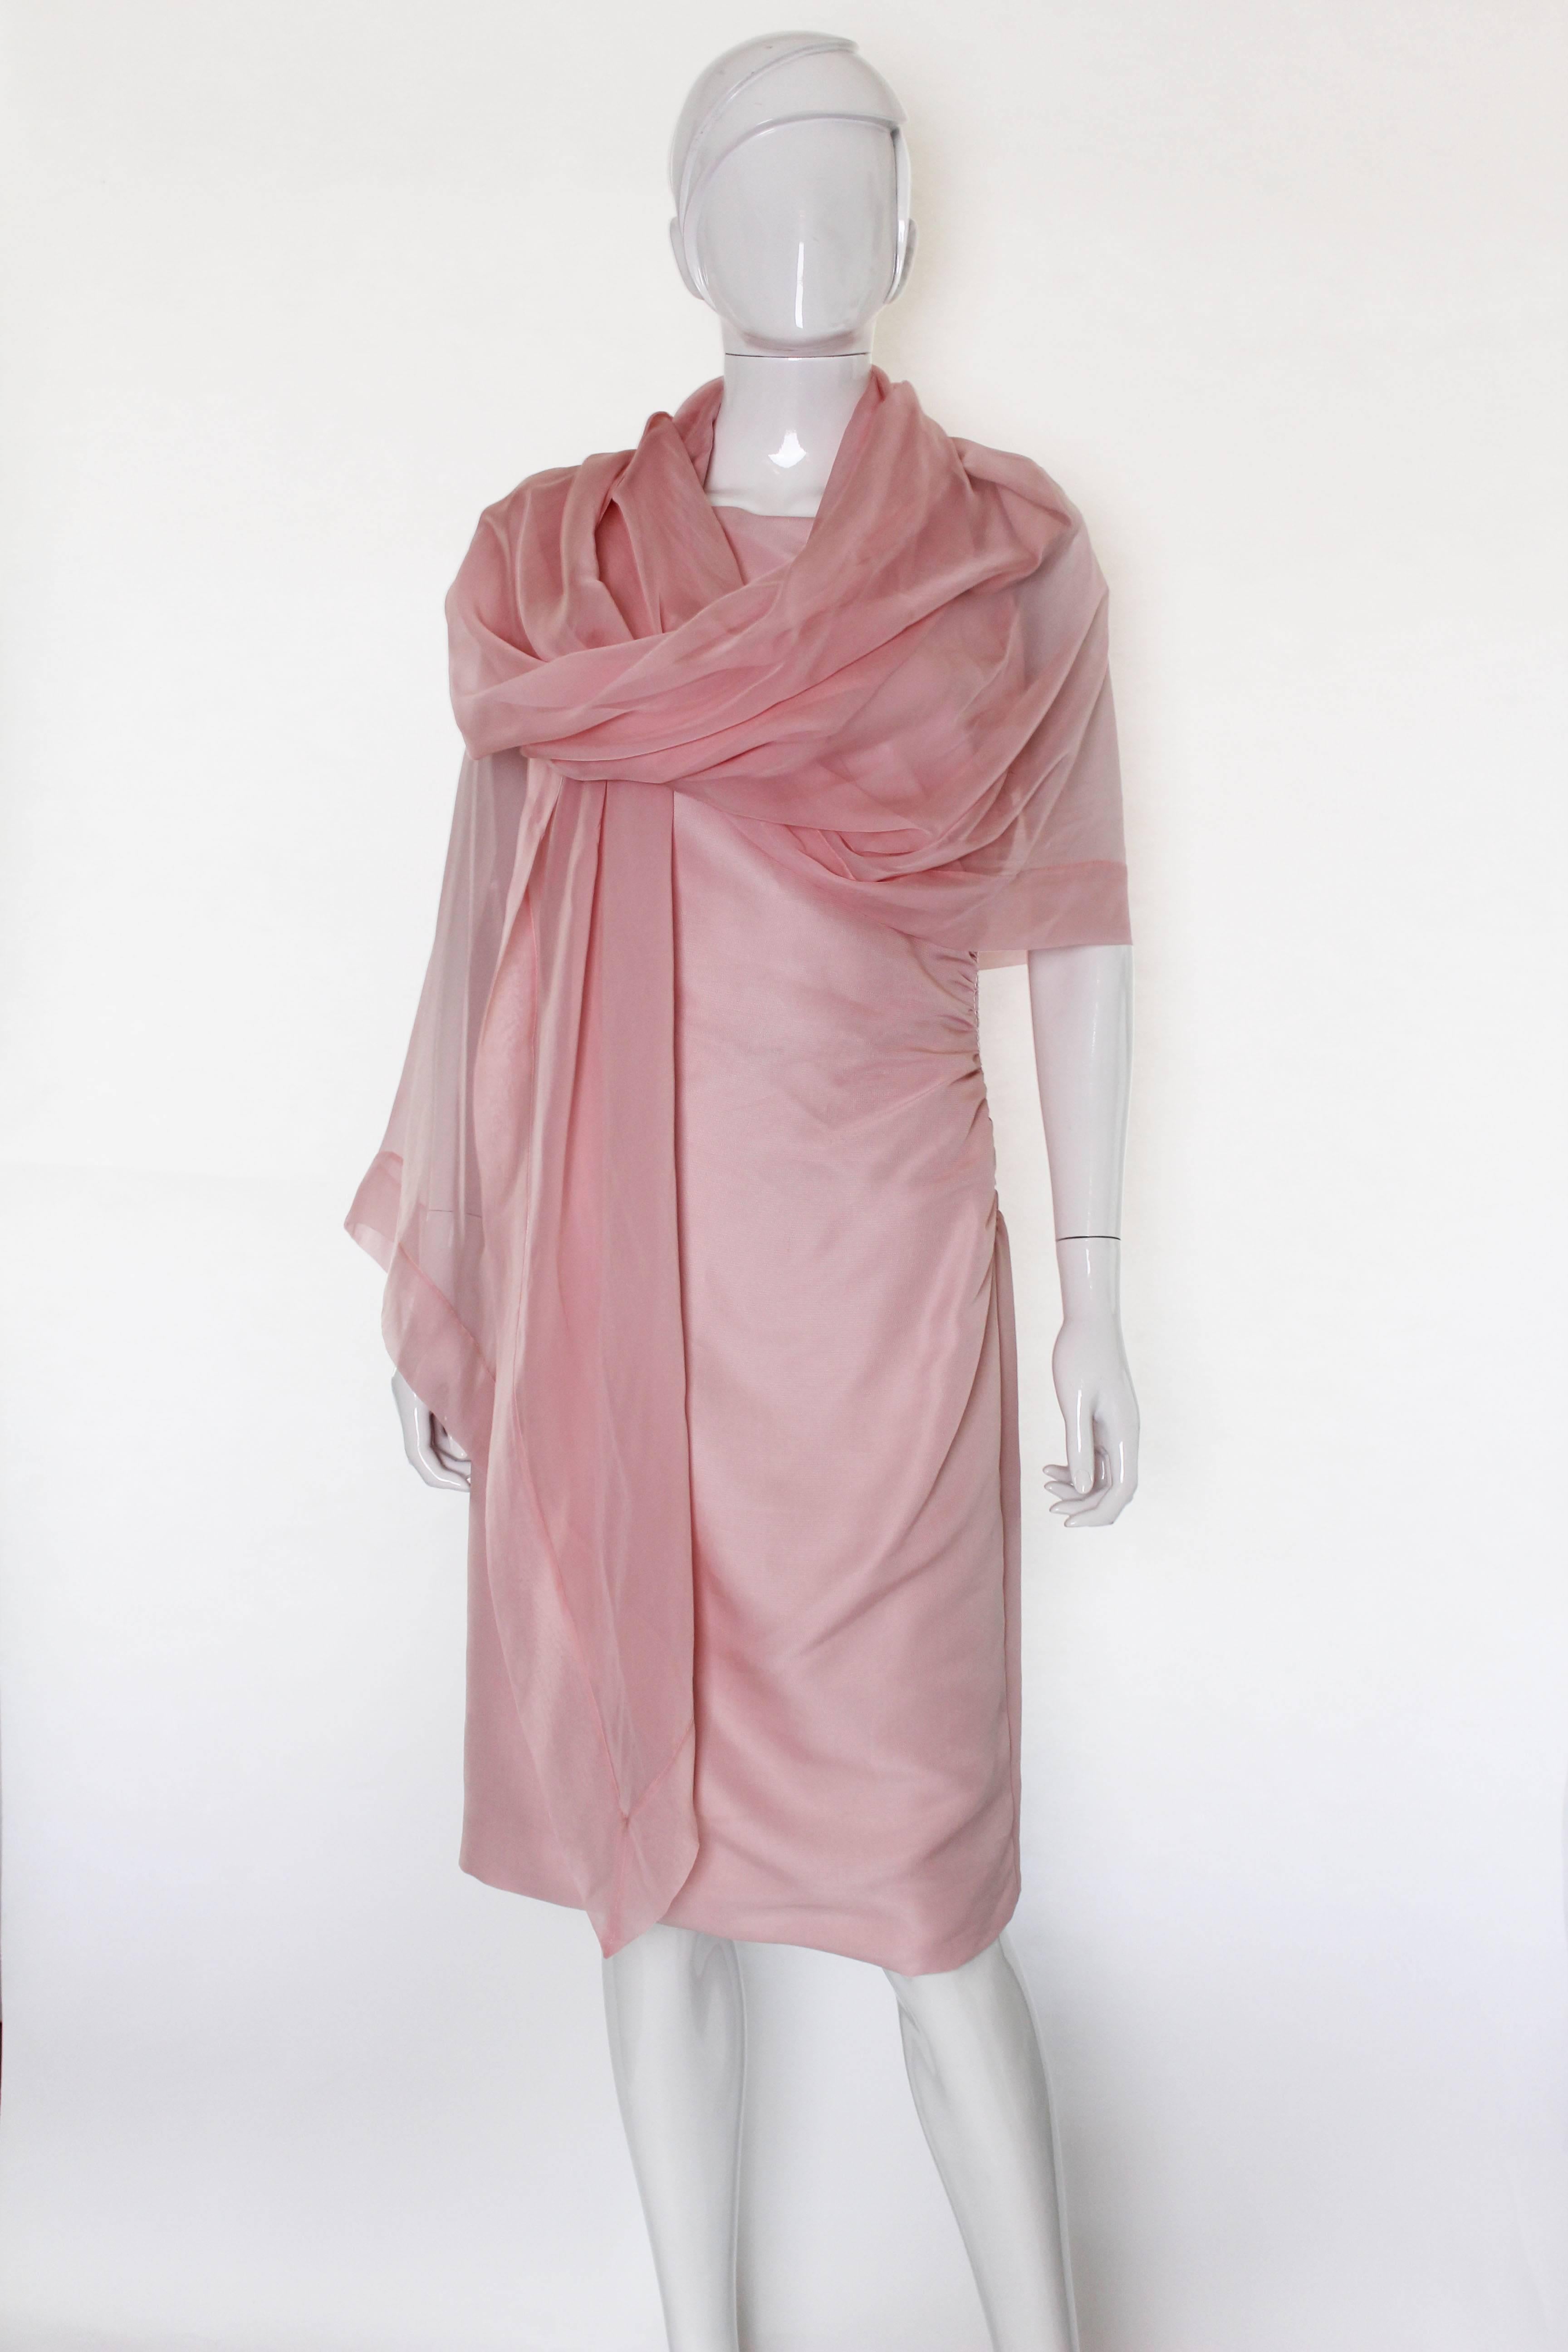 This blush silk Valentino cocktail dress is a lovely piece with some great detailing. It is an asymmetric design, with different straps on either shoulder. One side has a beautiful fan shaped bow draped from front to back, with the other is a simple